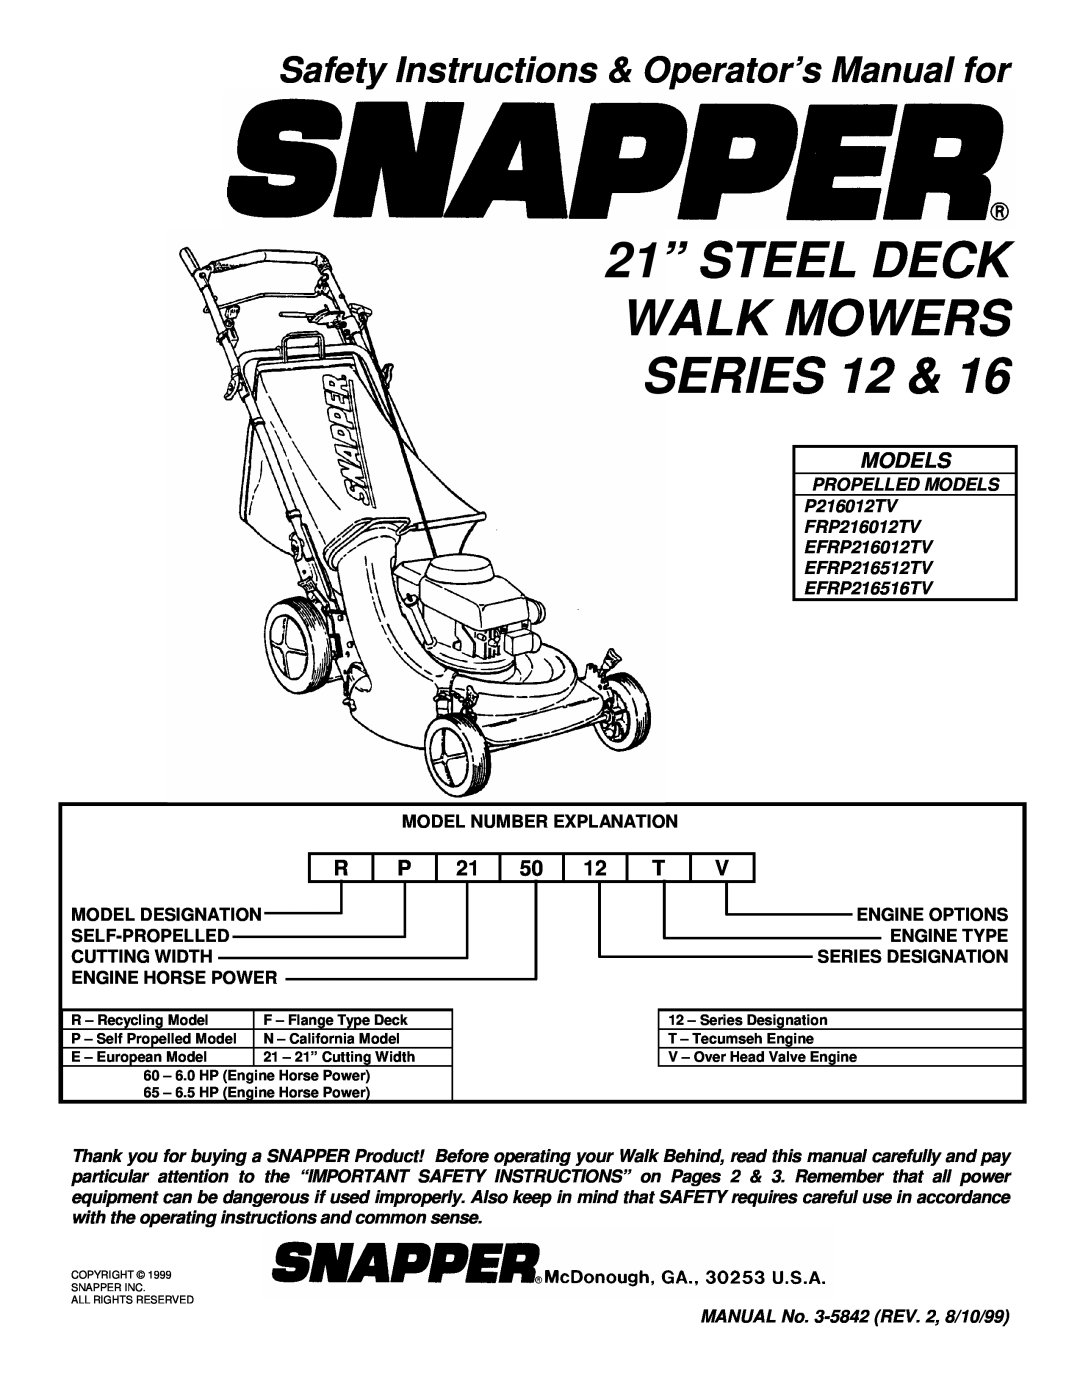 Snapper P216012TV, FRP216012TV, EFRP216012TV, EFRP216512TV, EFRP216516TV important safety instructions Models 